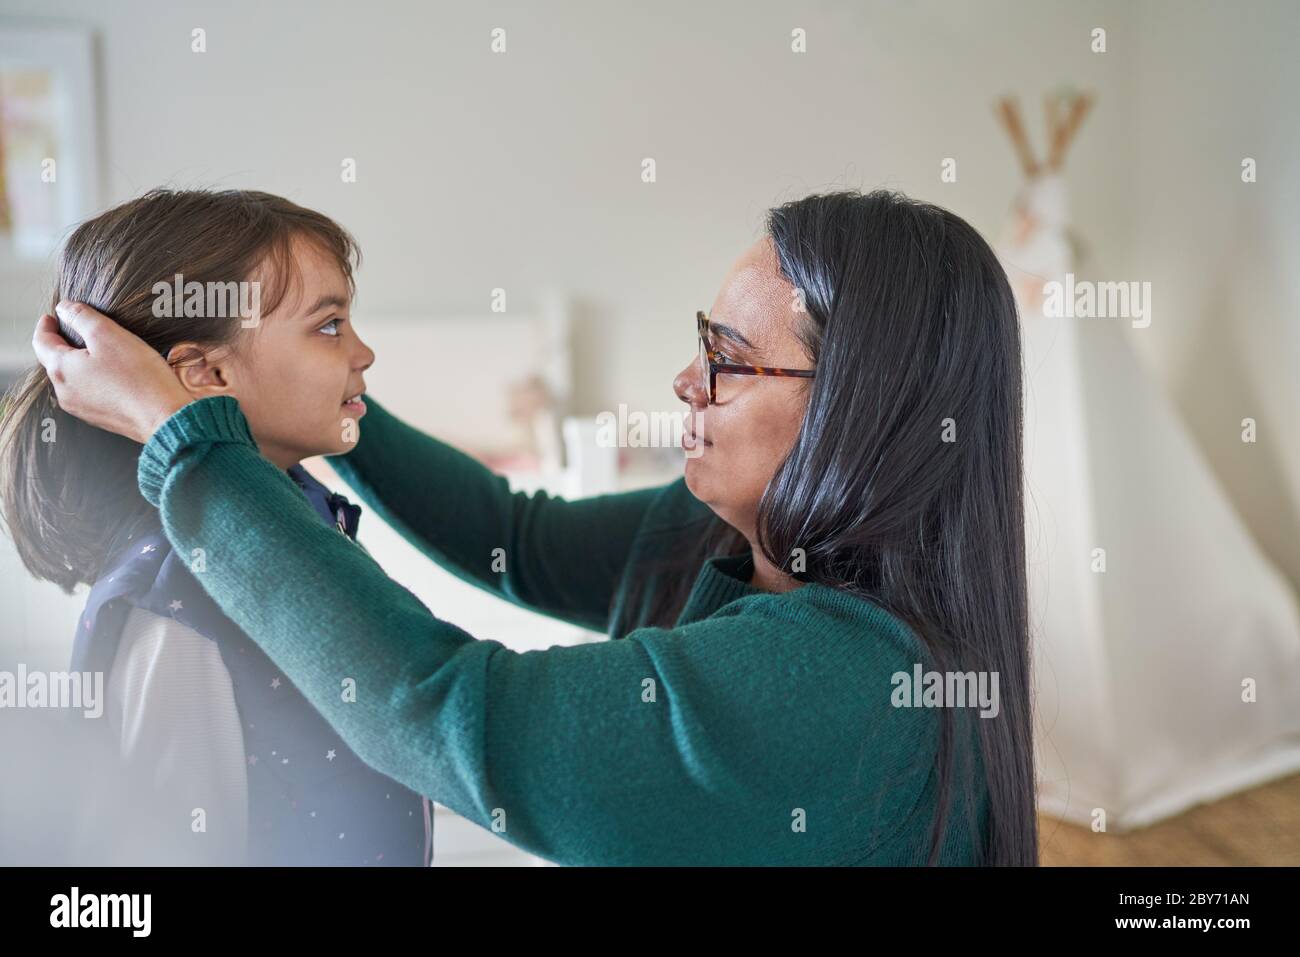 Mother helping daughter fix hair Stock Photo